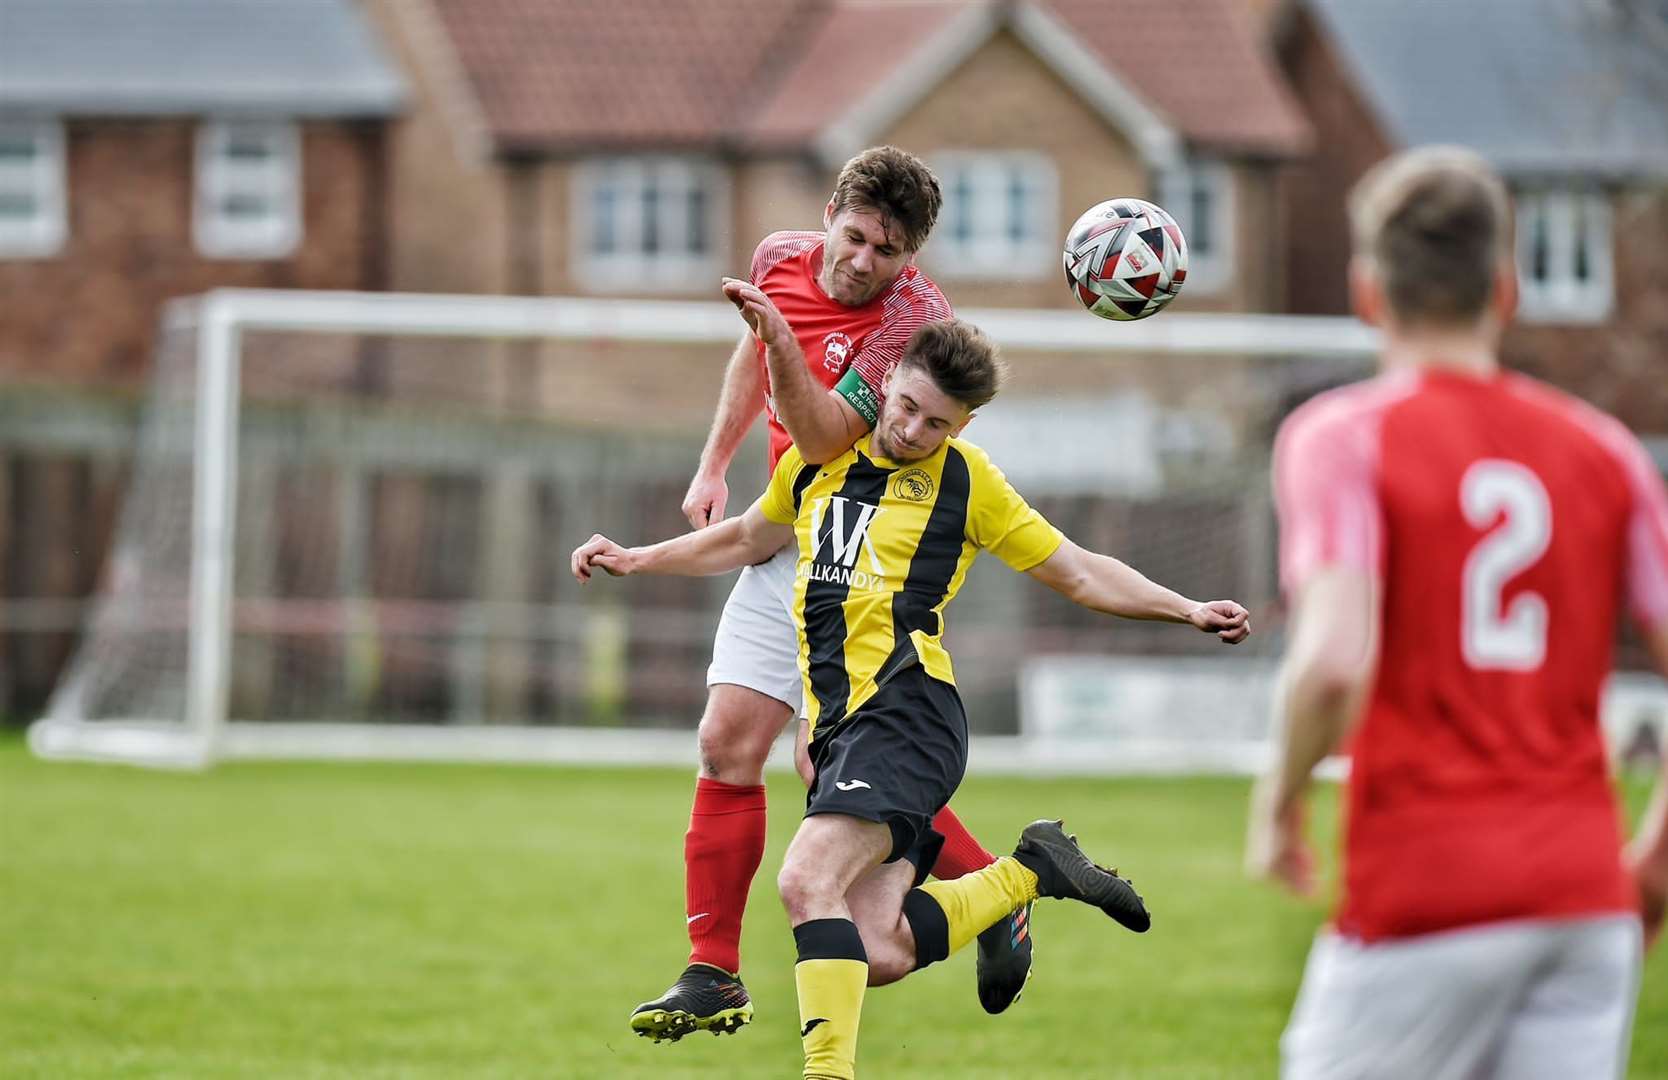 Action between Downham Town and Debenham LC at the SCL Memorial Field this afternoon. Picture: Ian Burt (63448444)